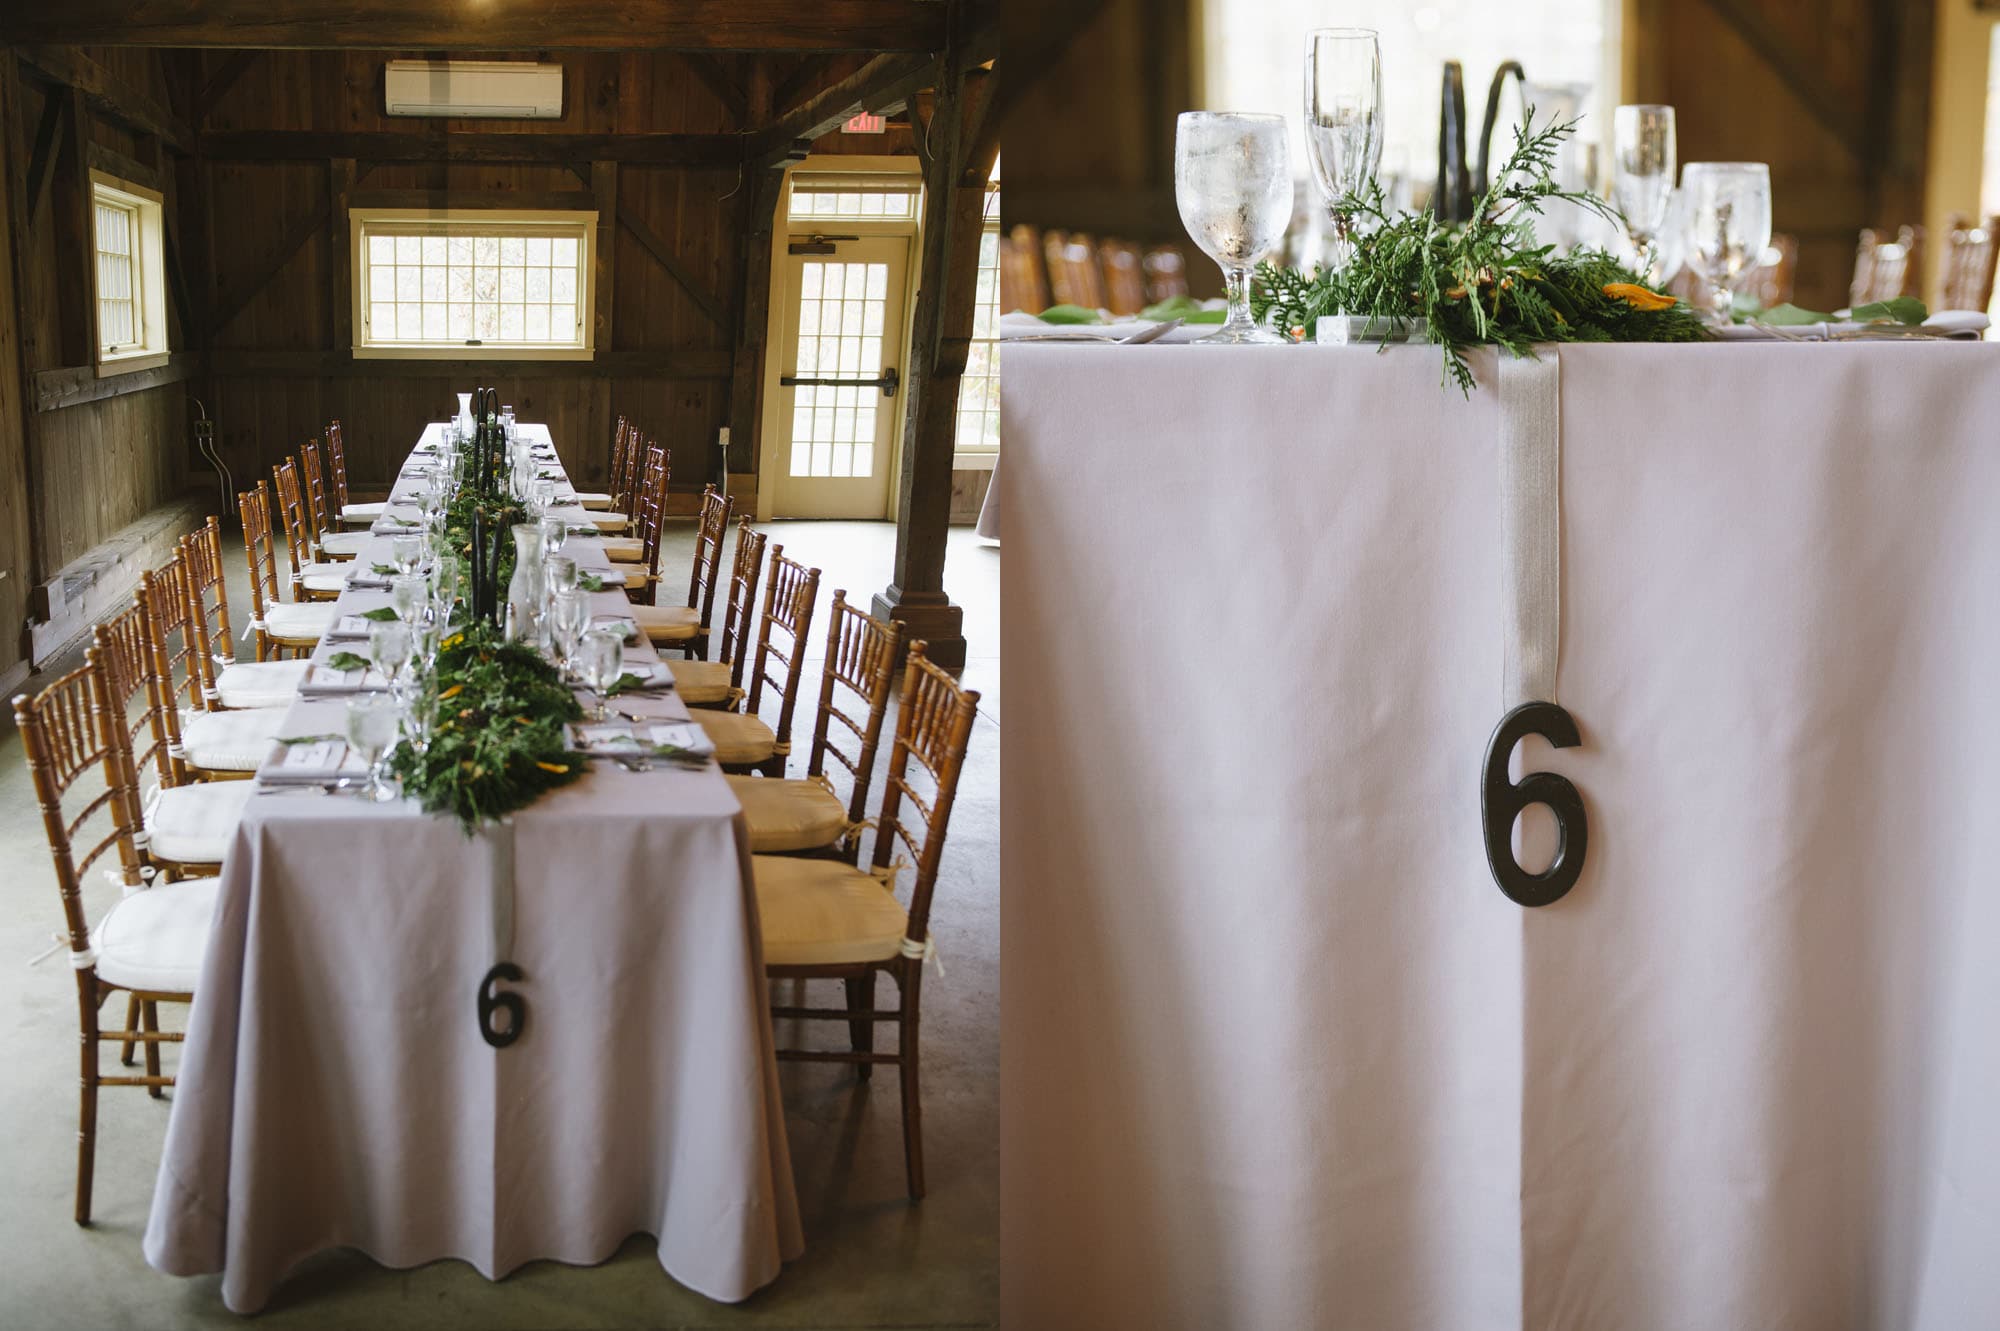 Quonquont Farm, New England Wedding, Orchard Wedding, Eileen Meny Photography